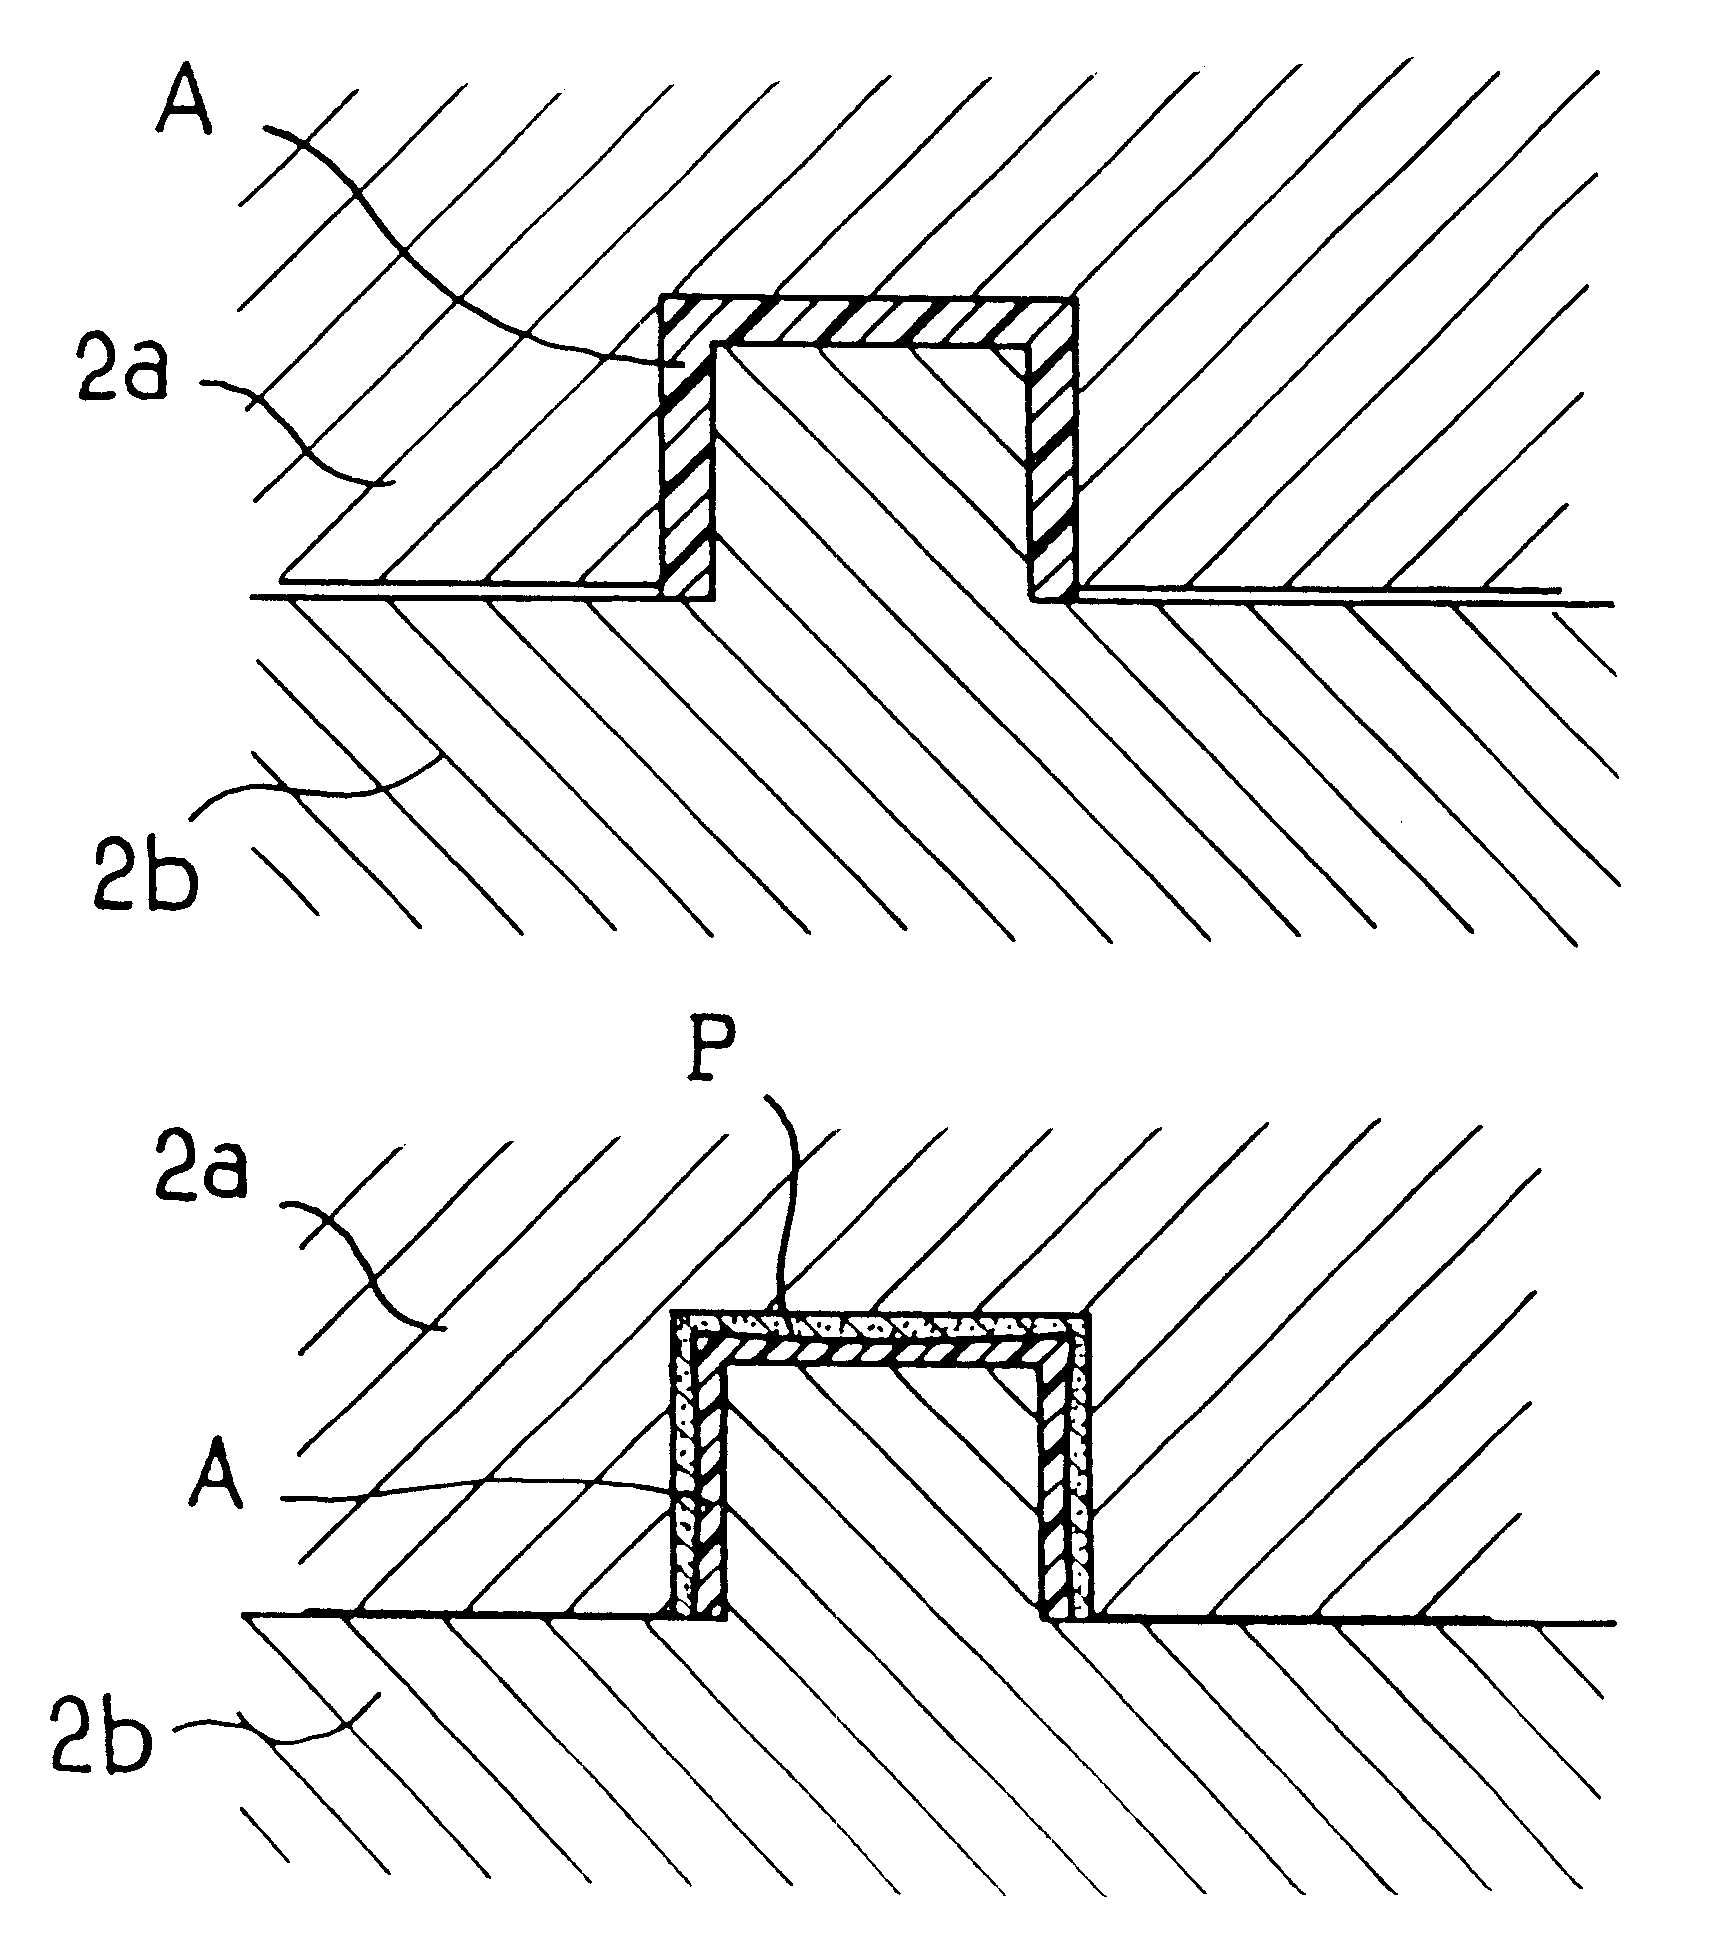 Method and apparatus for manufacturing painted or varnished parts out of molded plastics material